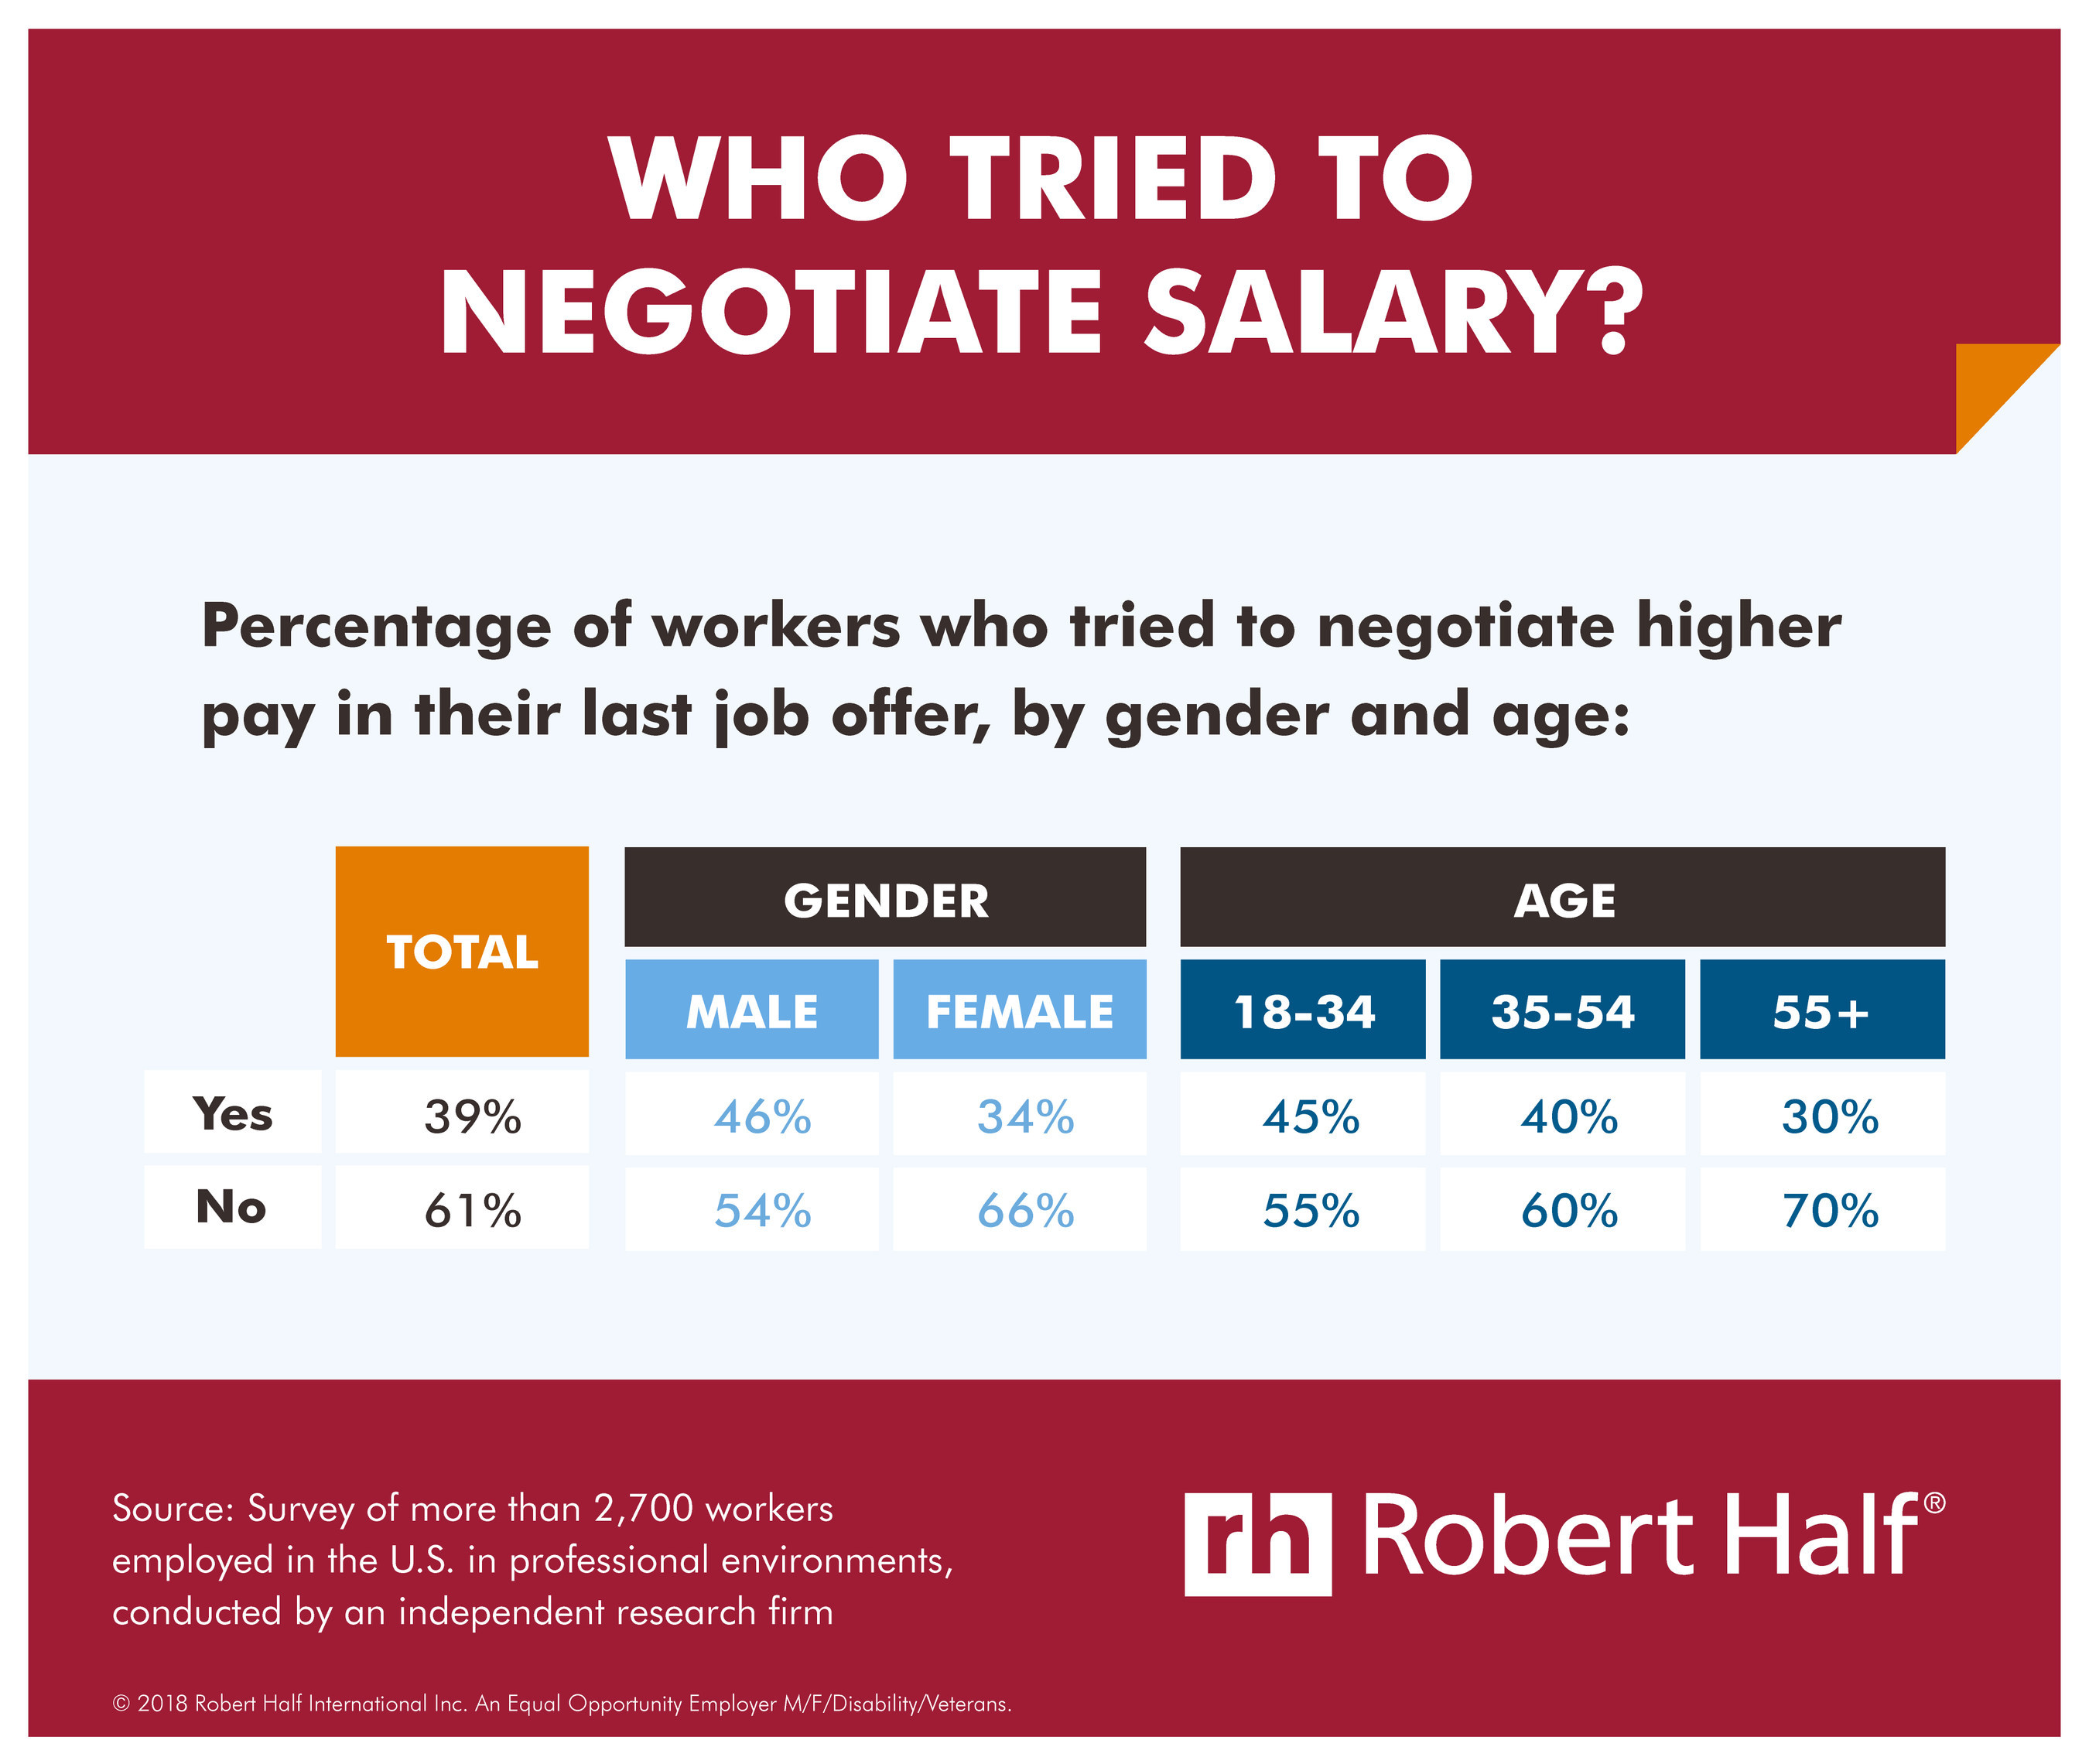 Starting Salary Negotiable or Not?